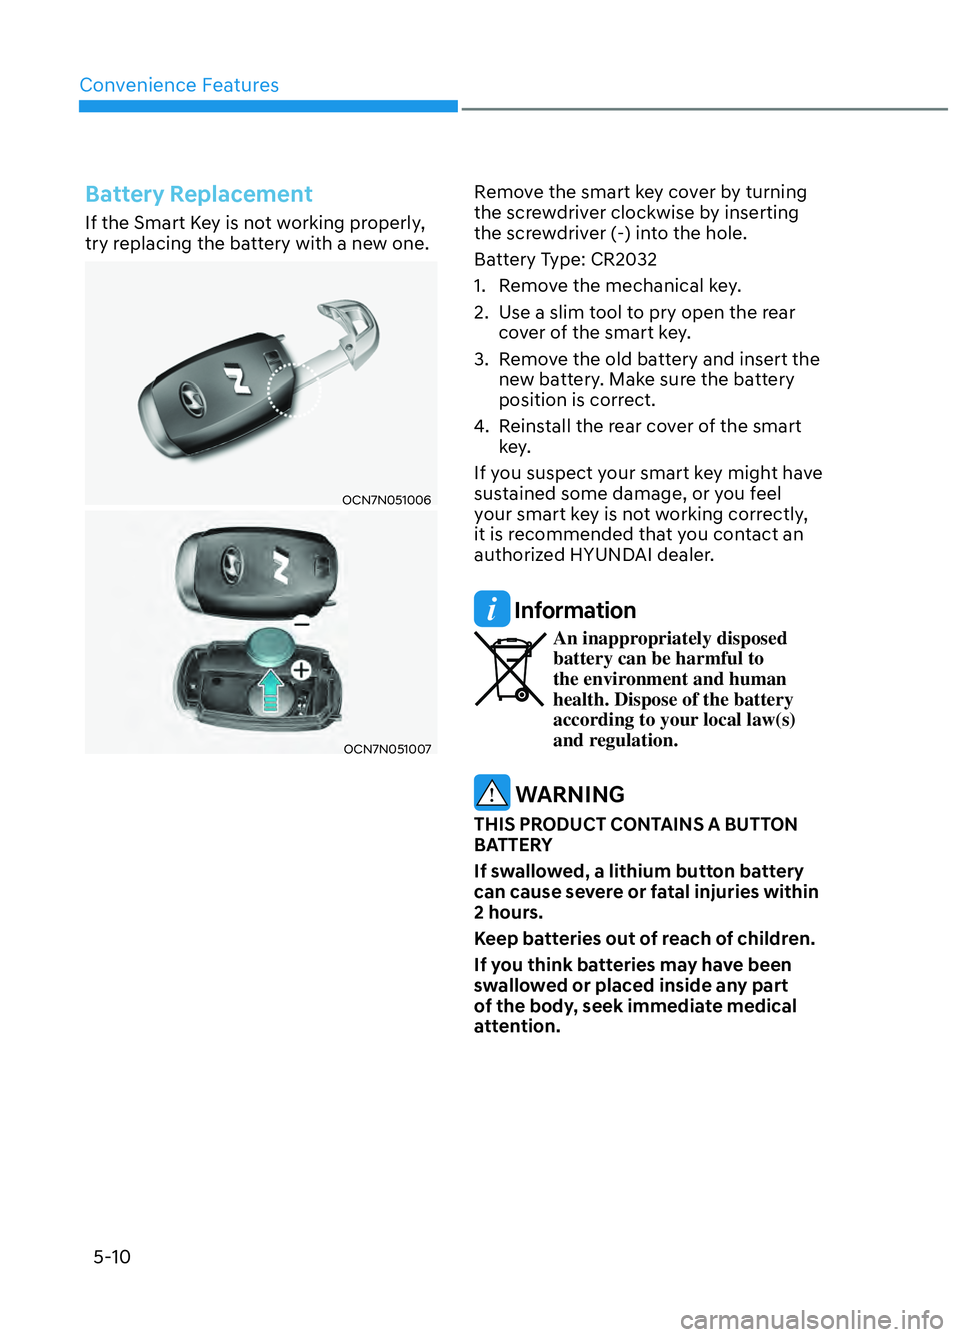 HYUNDAI ELANTRA N 2022  Owners Manual Convenience Features5-10
Battery Replacement
If the Smart Key is not working properly, 
try replacing the battery with a new one.
OCN7N051006OCN7N051006
OCN7N051007OCN7N051007
Remove the smart key cov